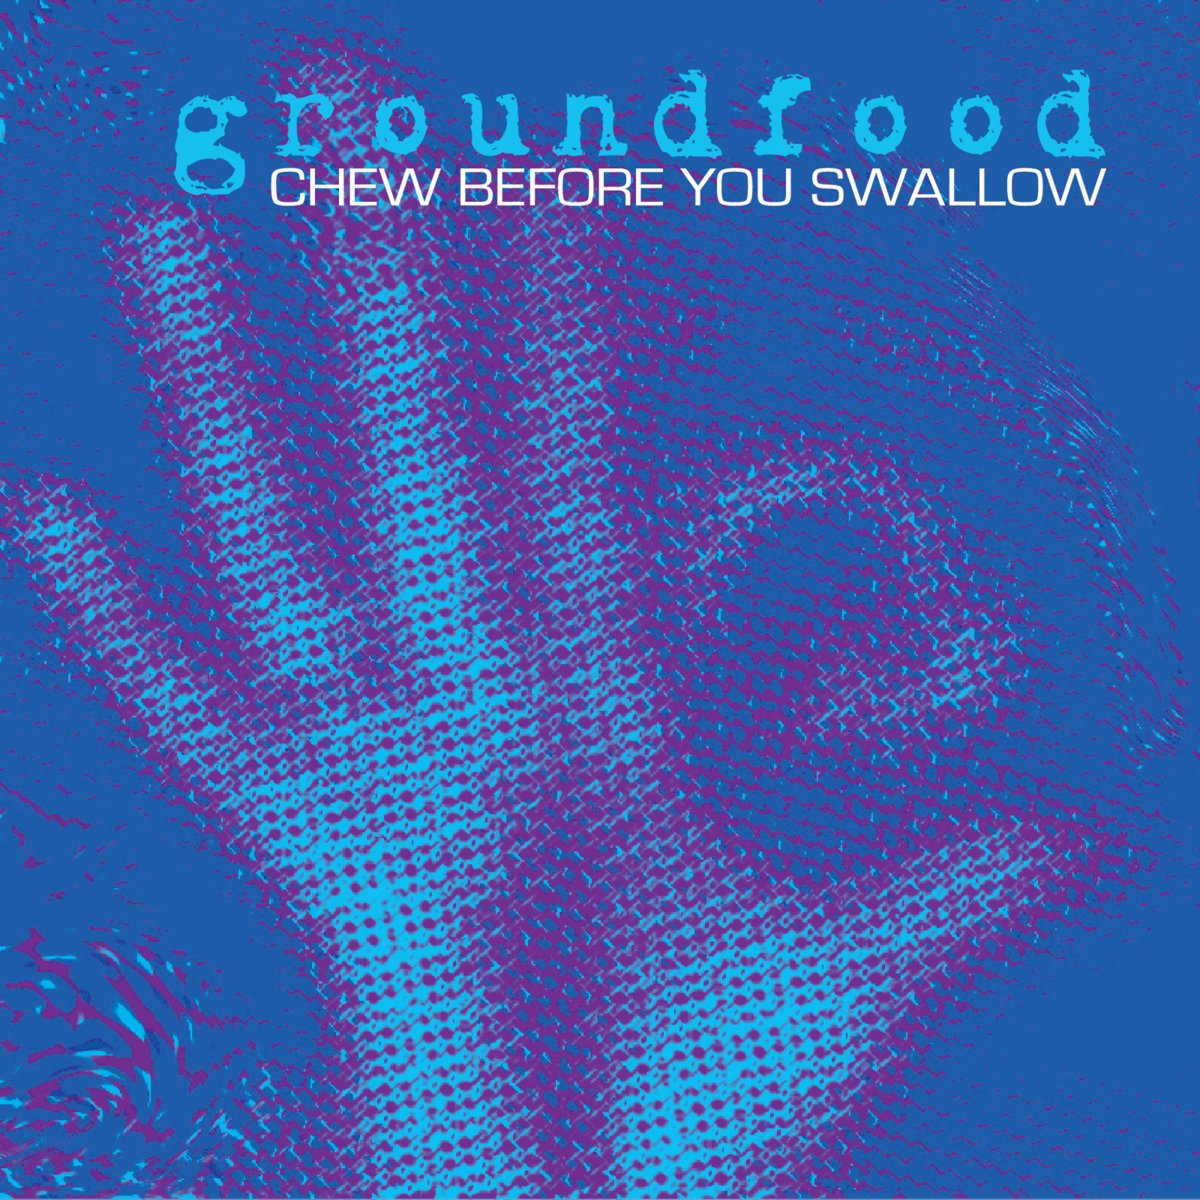 Groundfood - "Chew Before You Swallow" - Producer/Writer